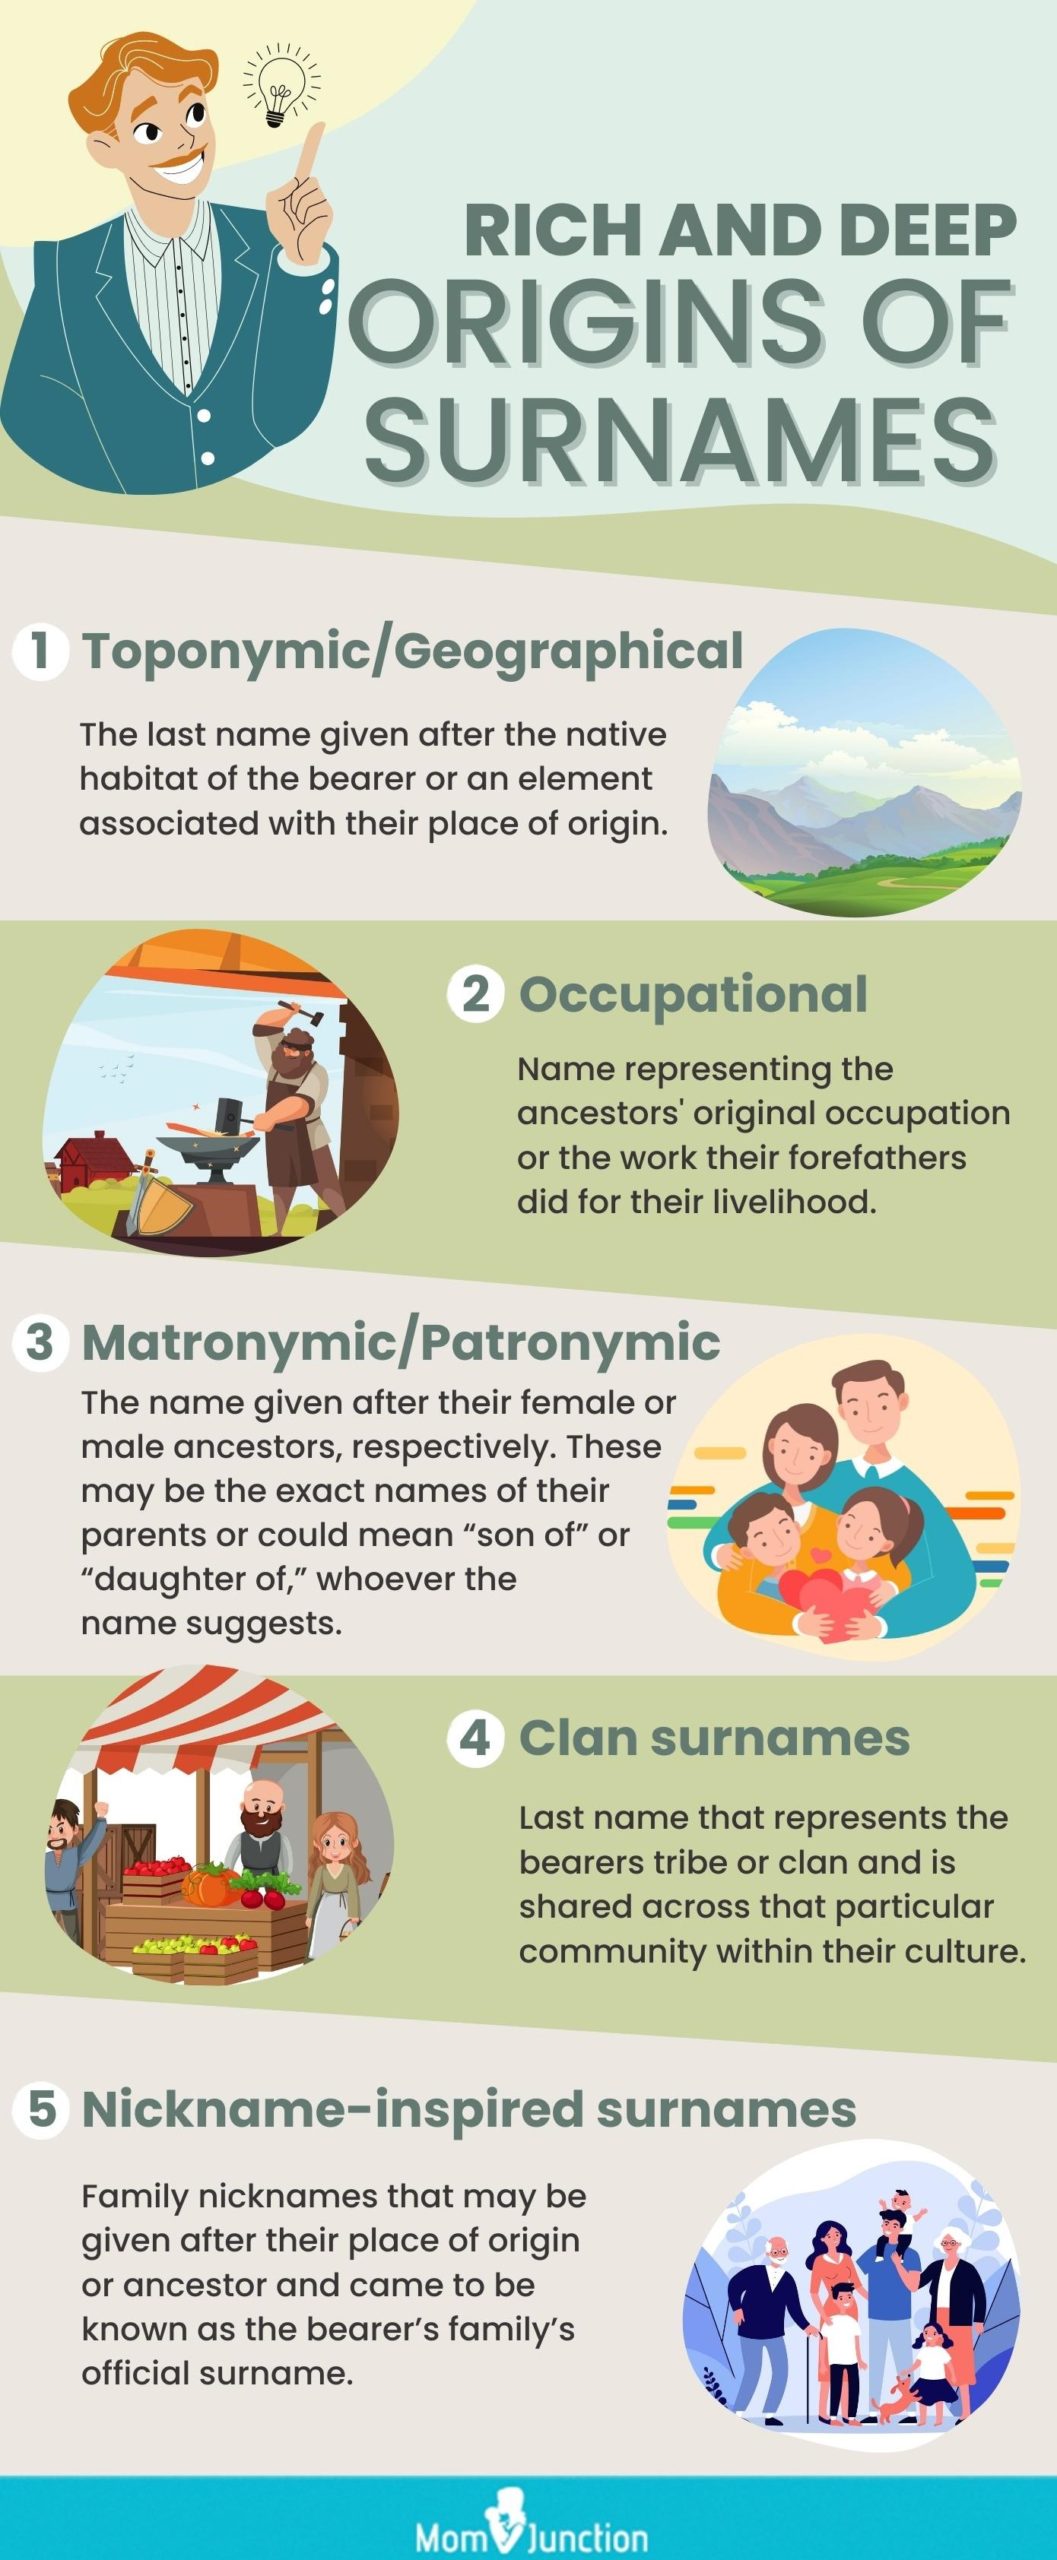 rich and deep orgins of surname [infographic]